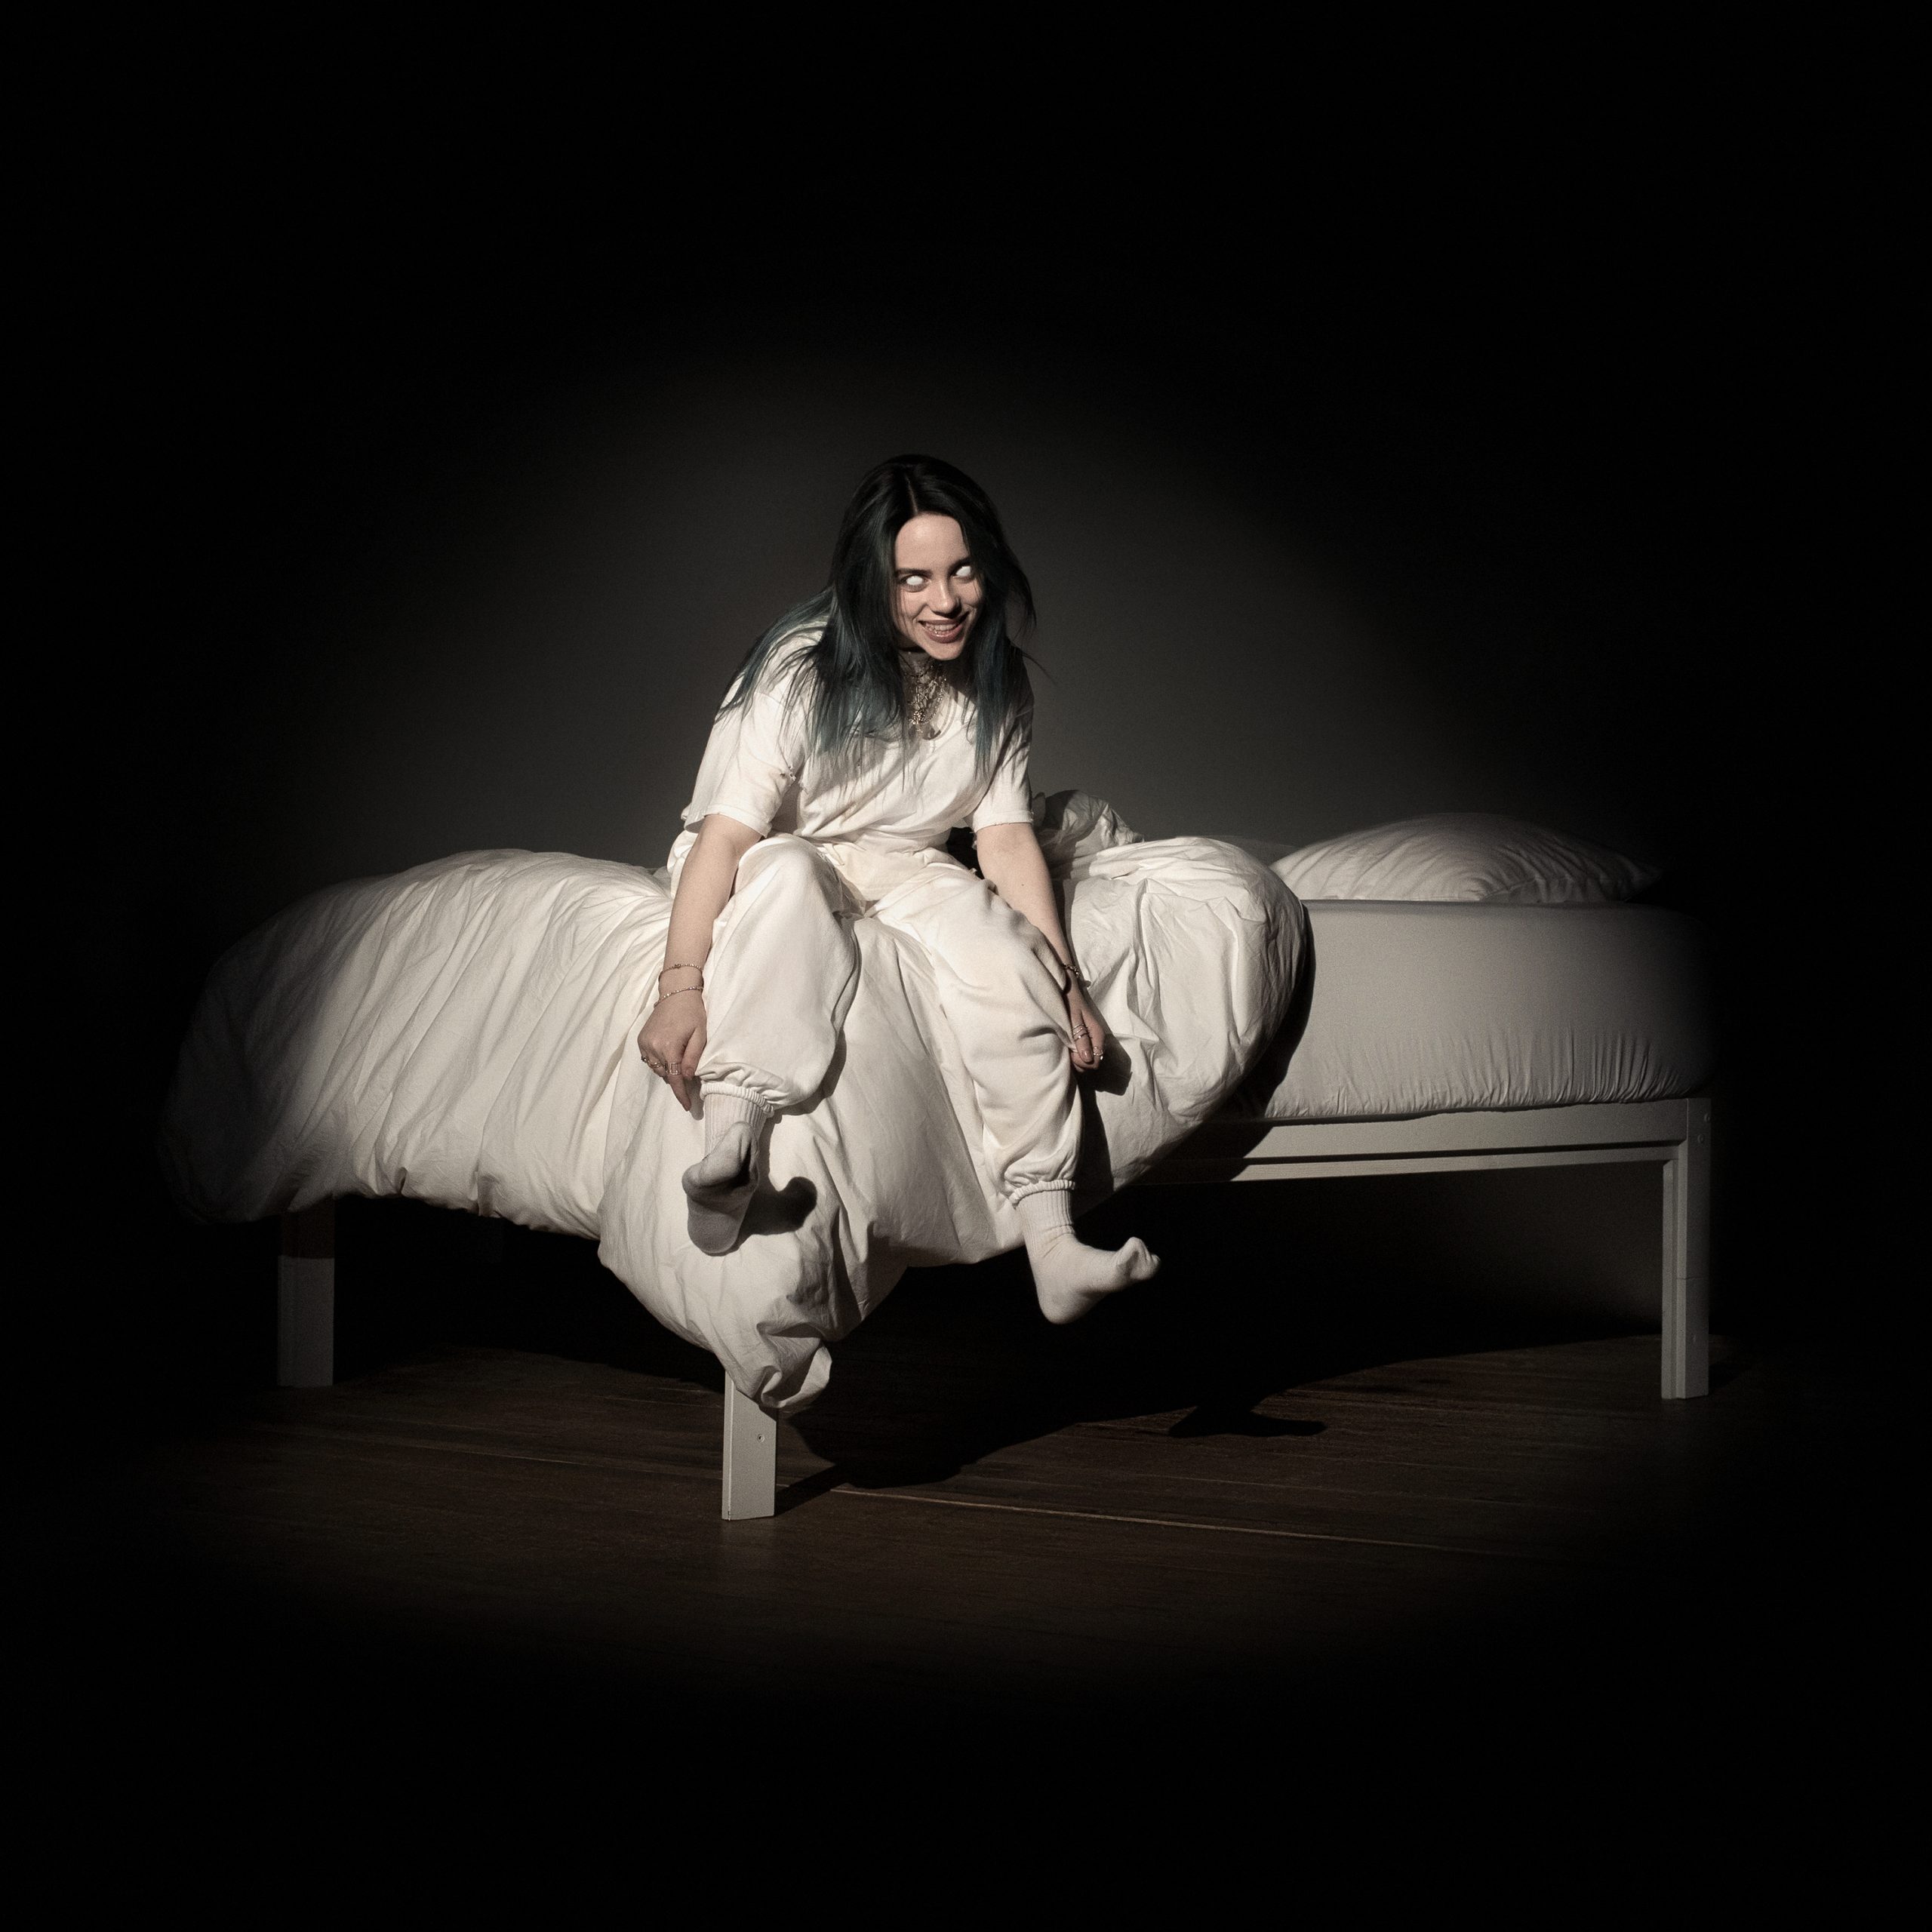 Billie Eilishs cover for her new album WHEN WE ALL FALL ASLEEP WHERE DO WE GO? featuring herself sitting on a bed, smiling and her eyes whited-out